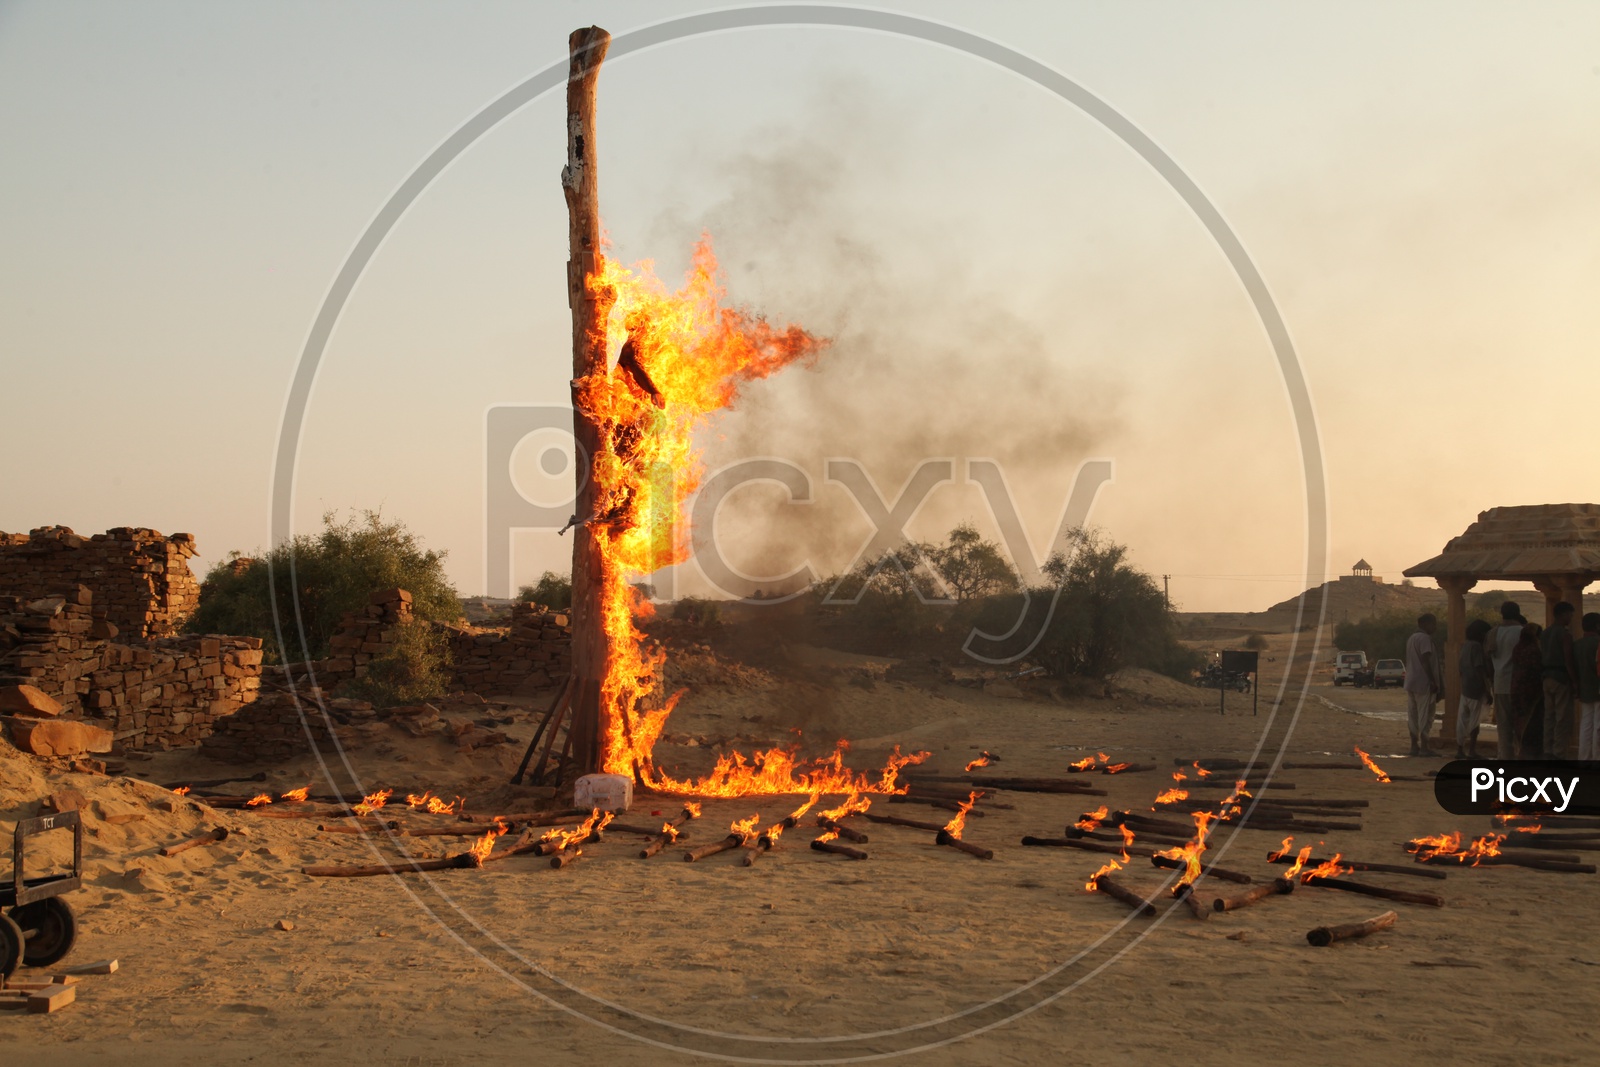 A man is tied to a pole and burnt